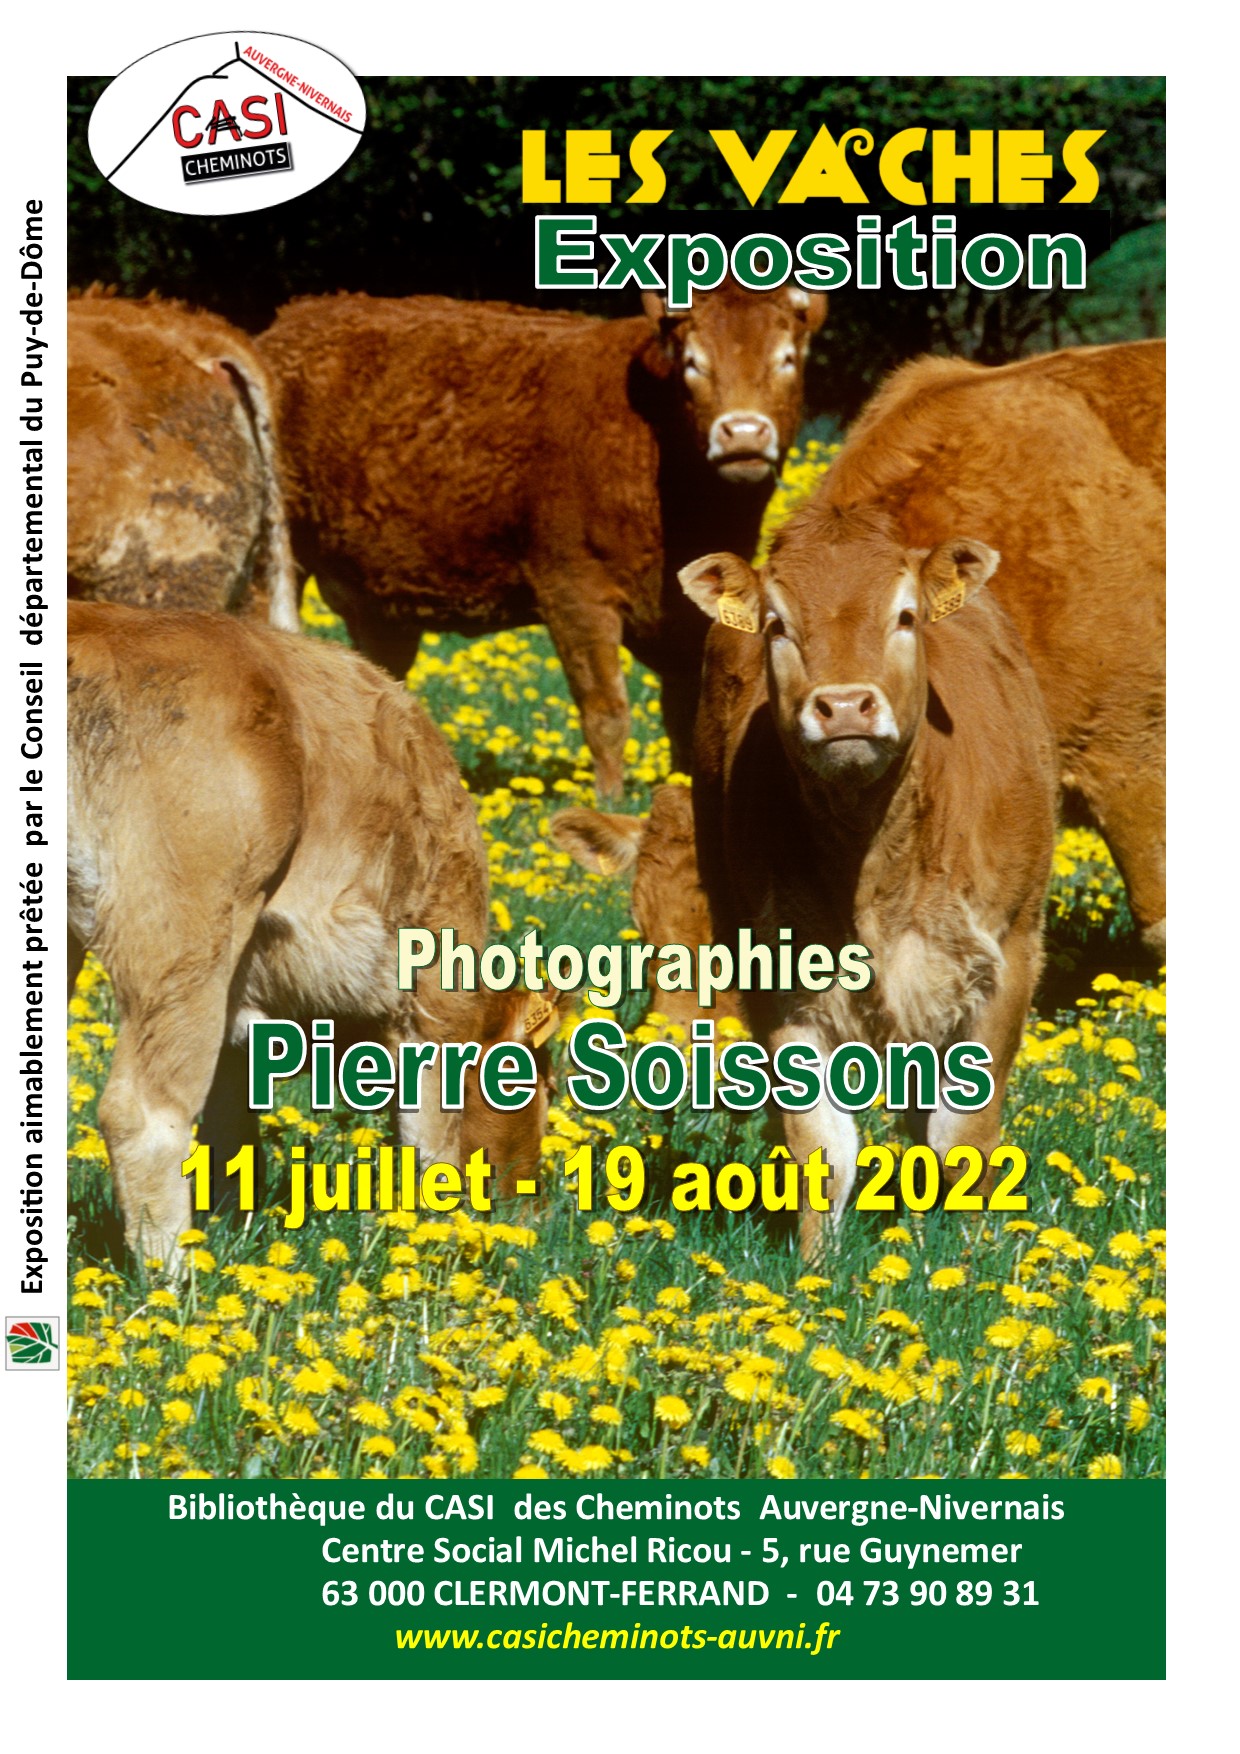 2022 expo Les vaches